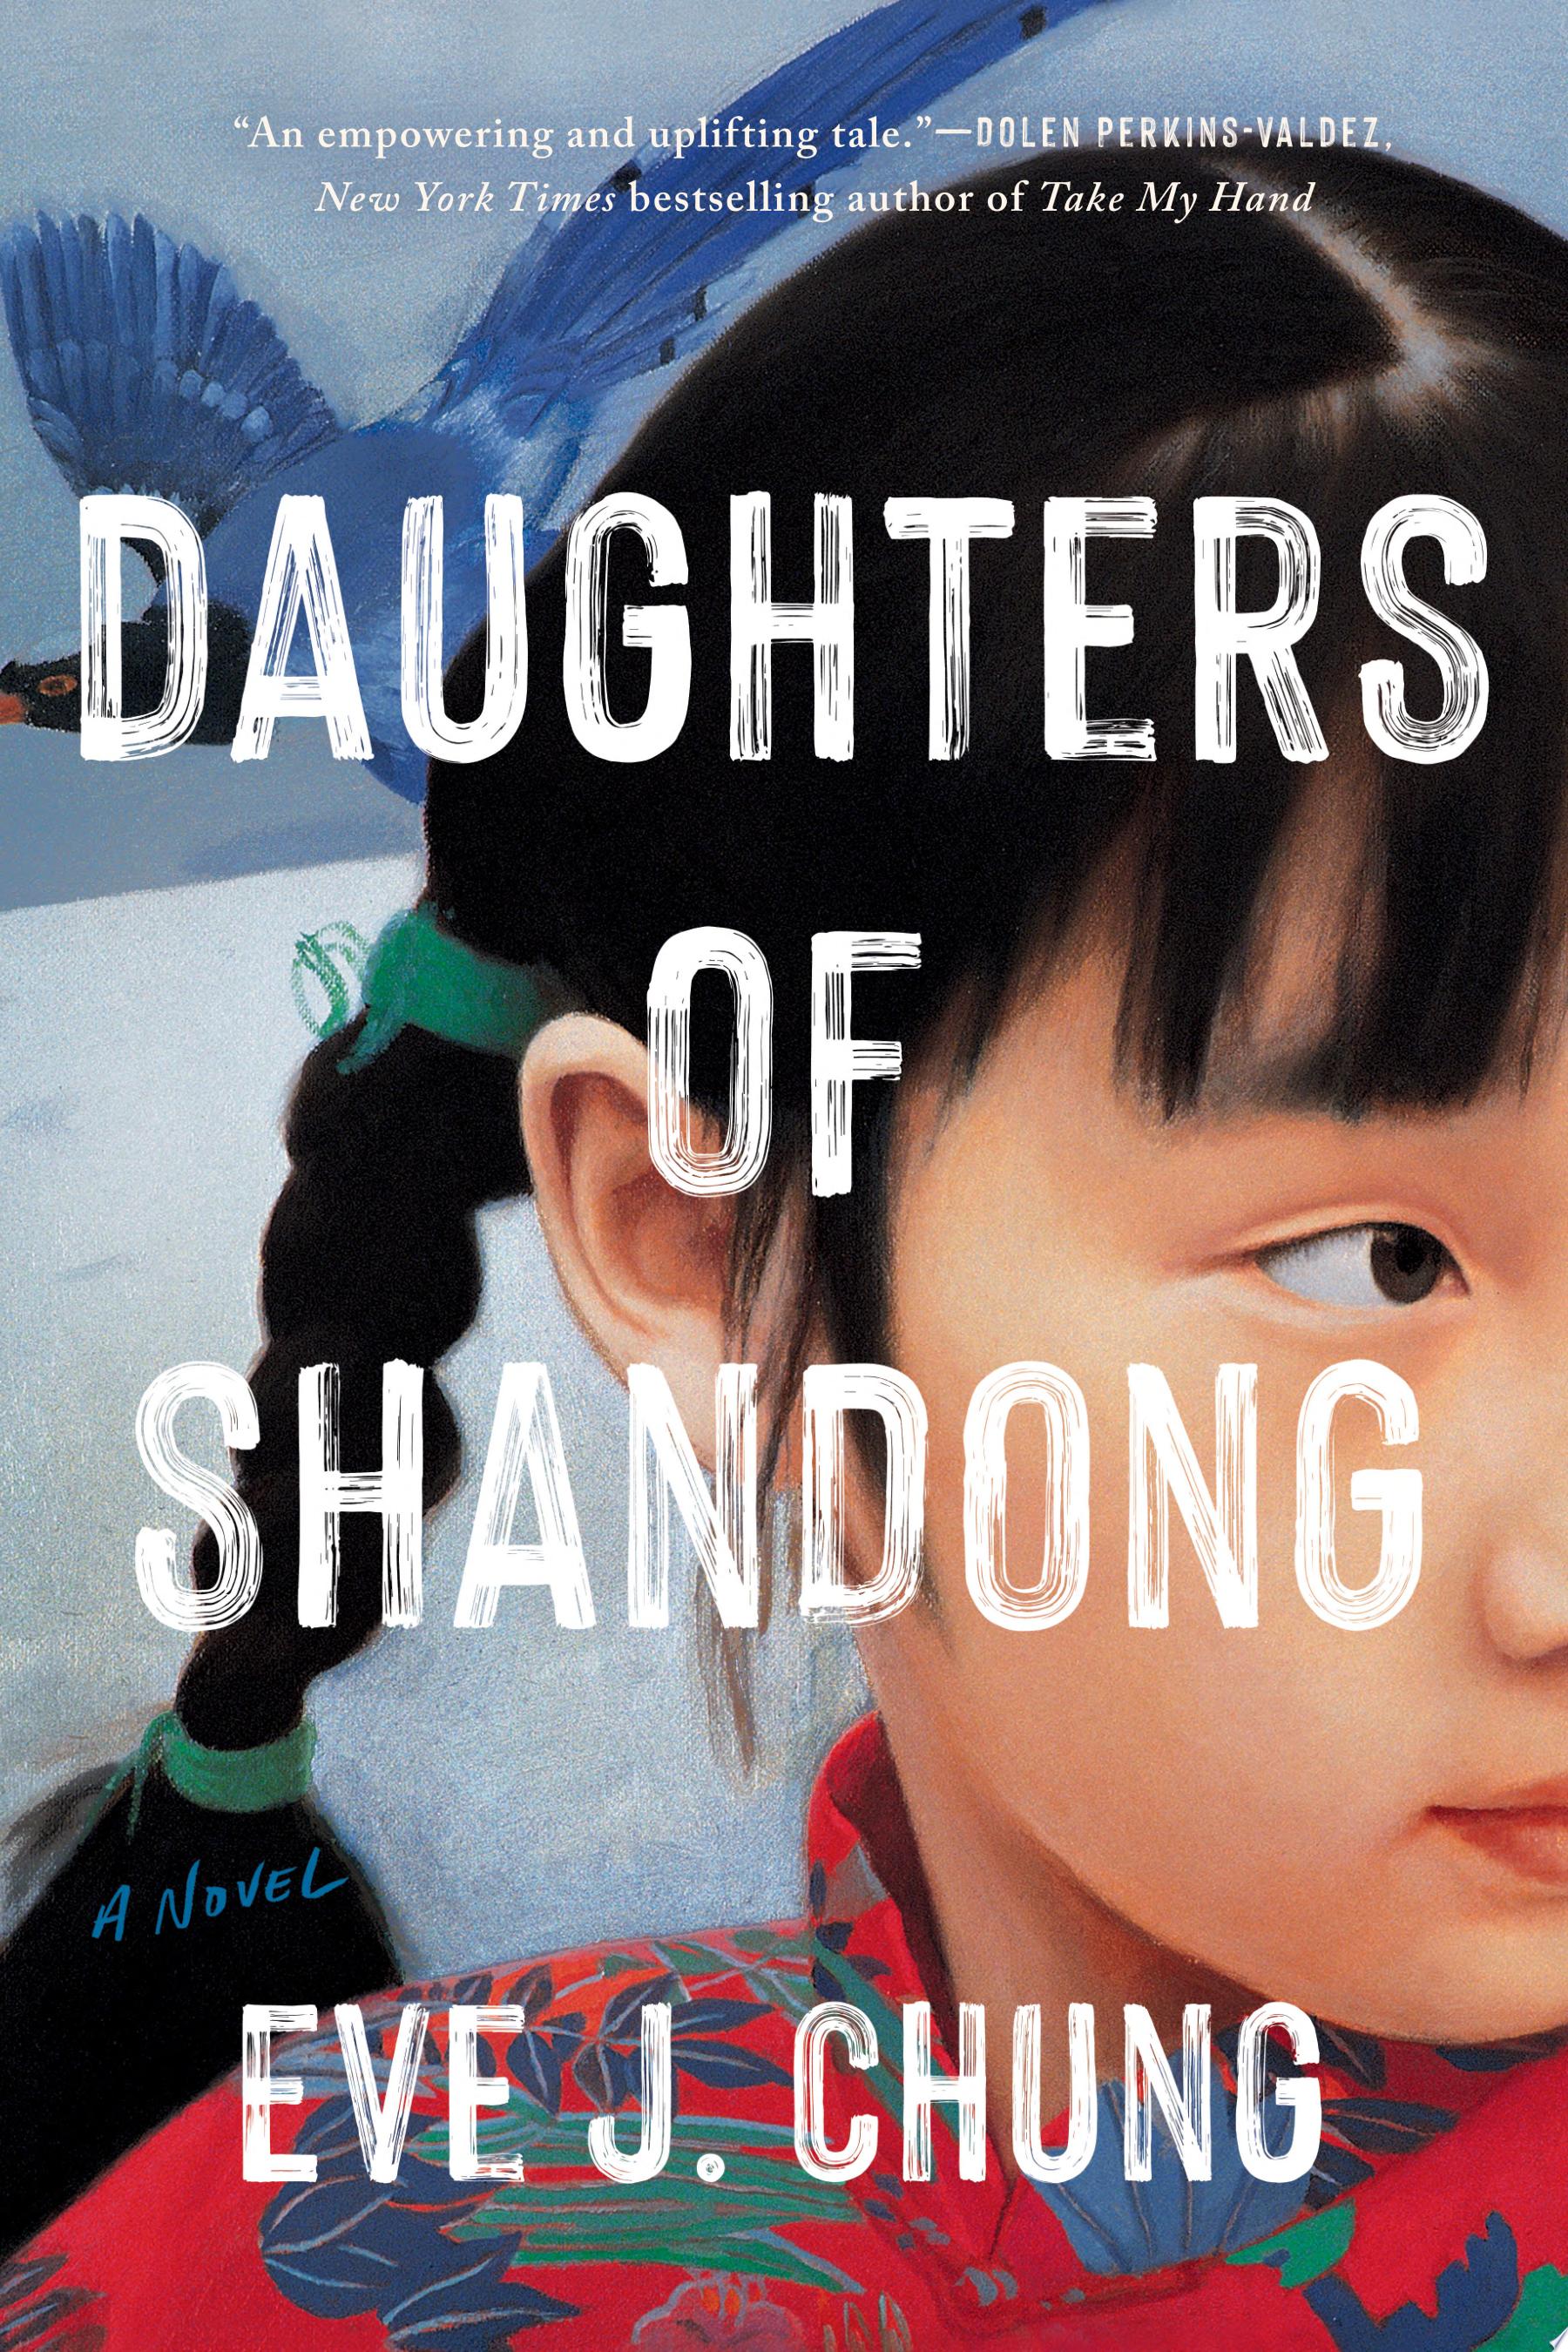 Image for "Daughters of Shandong" by Eve J. Chung